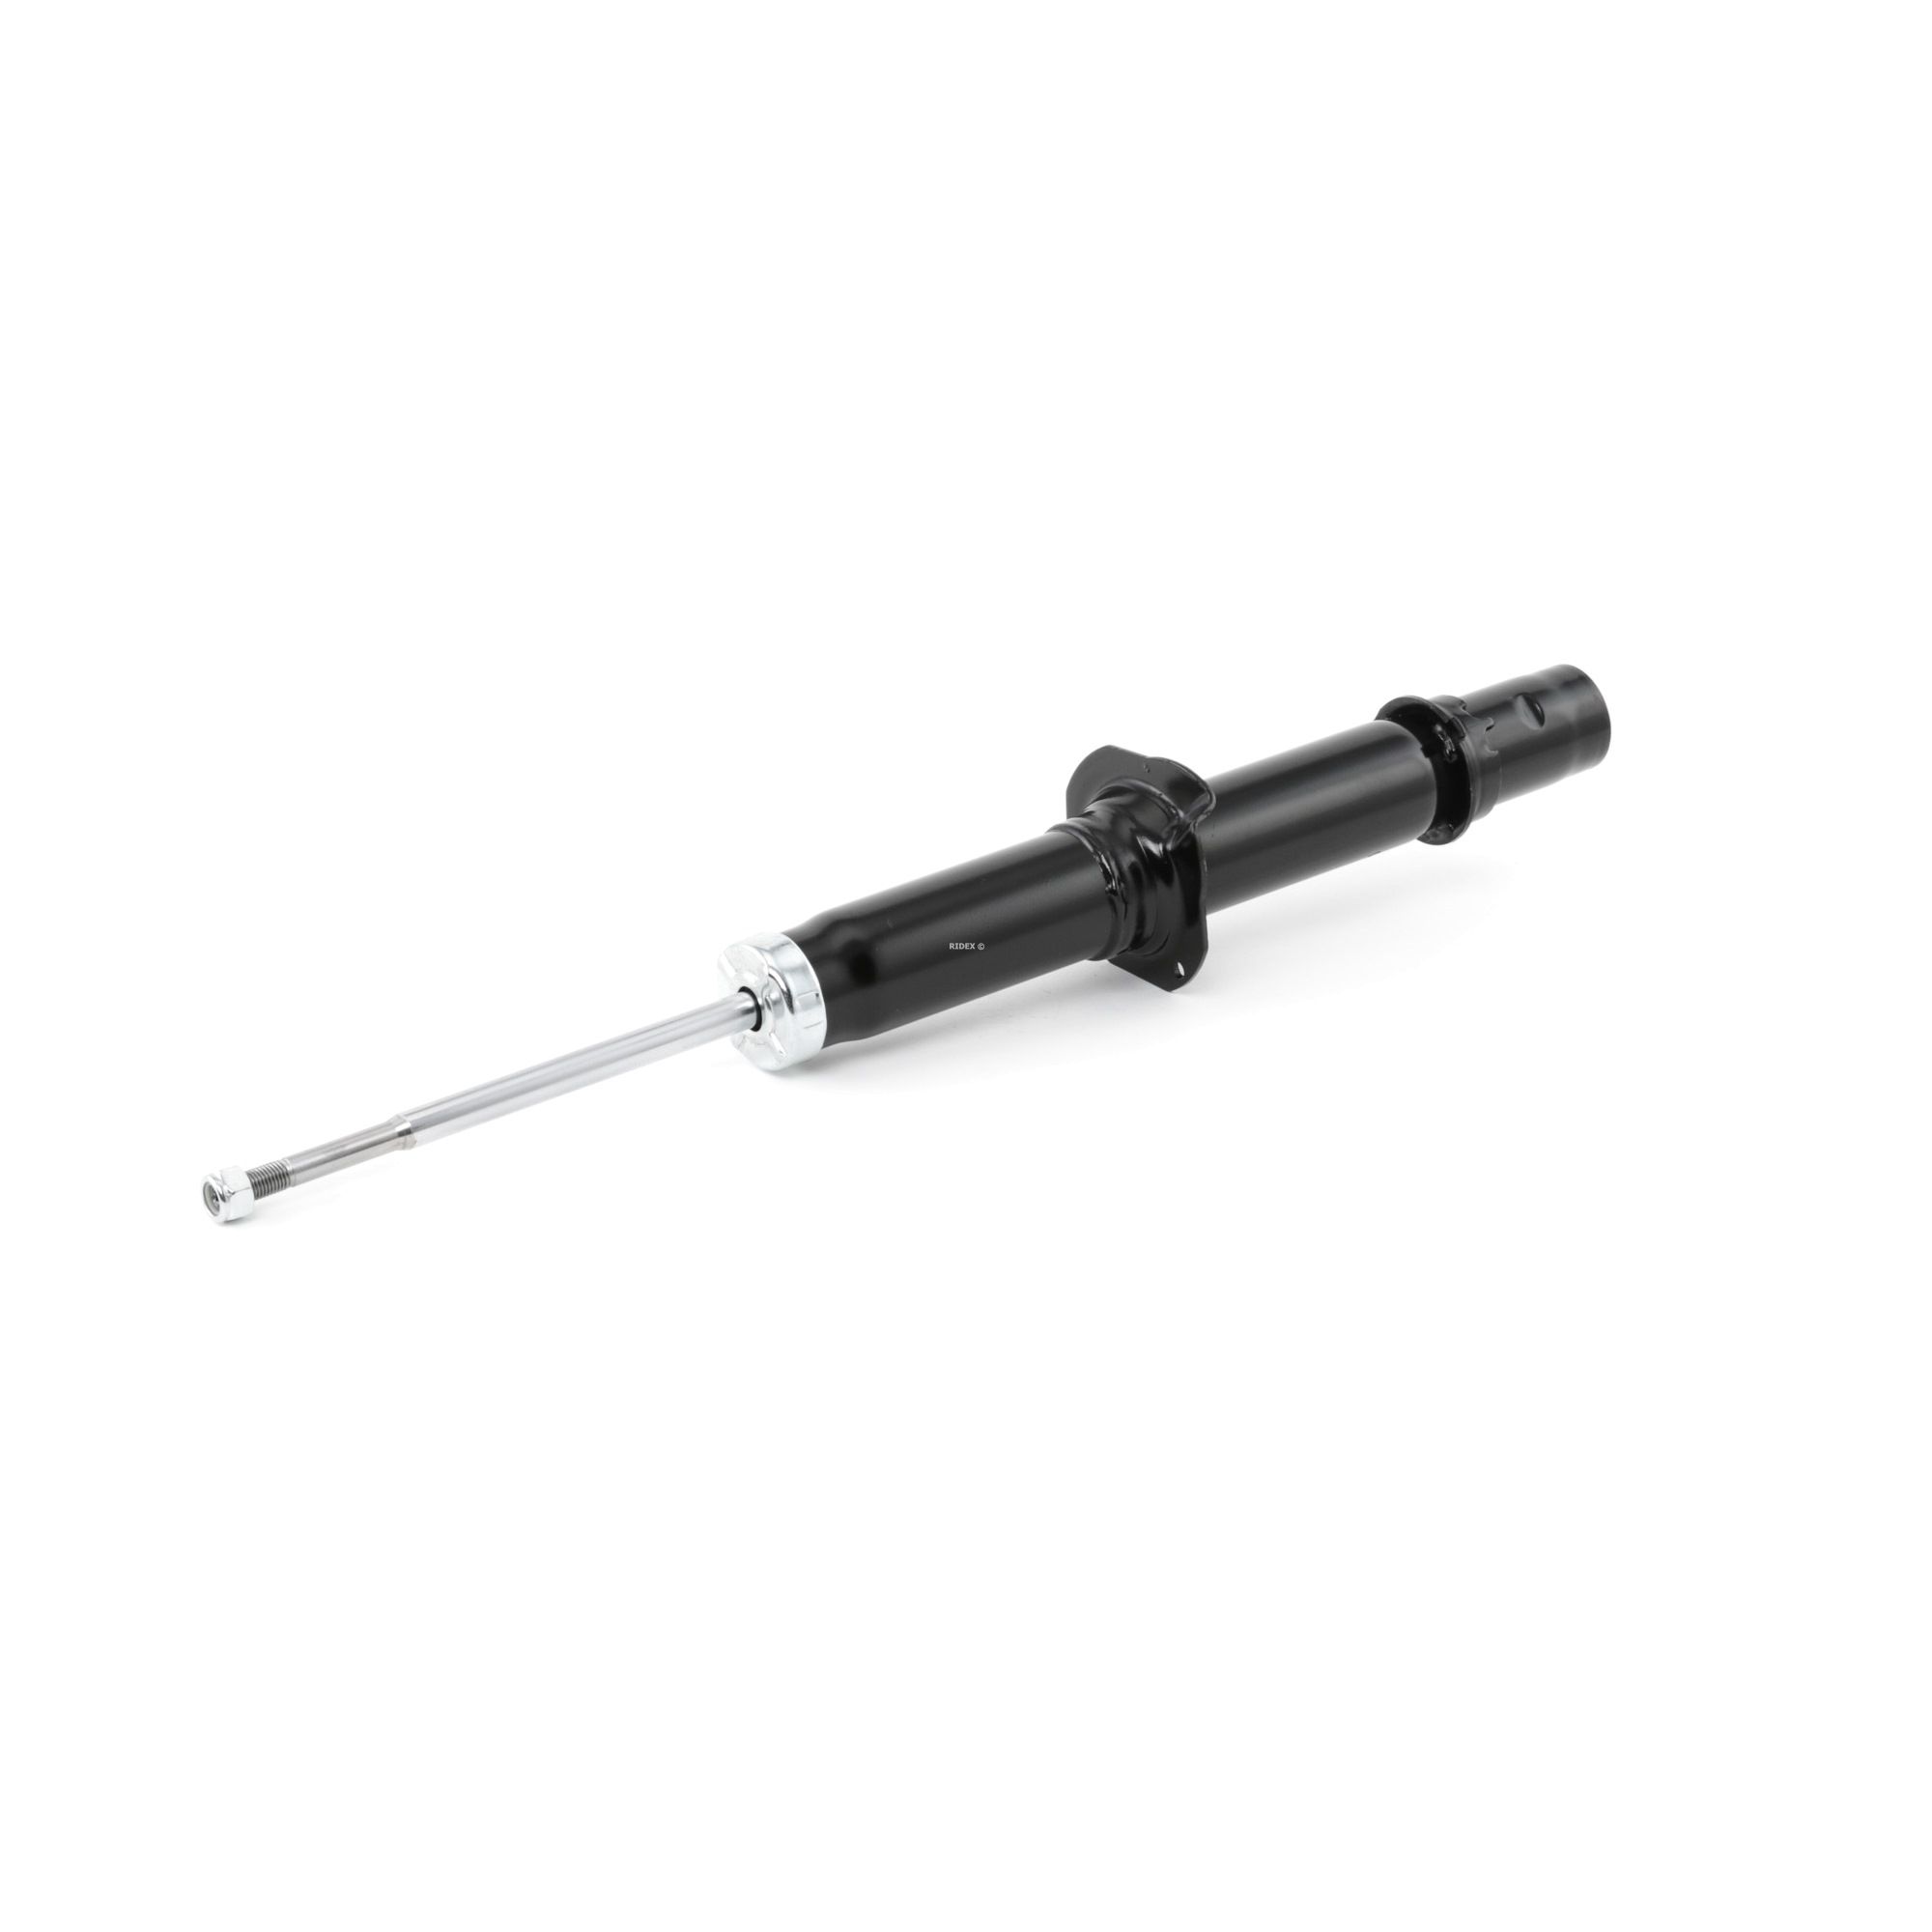 RIDEX Front Axle, Gas Pressure, Twin-Tube, Telescopic Shock Absorber, Top pin Length: 467, 337mm Shocks 854S0600 buy